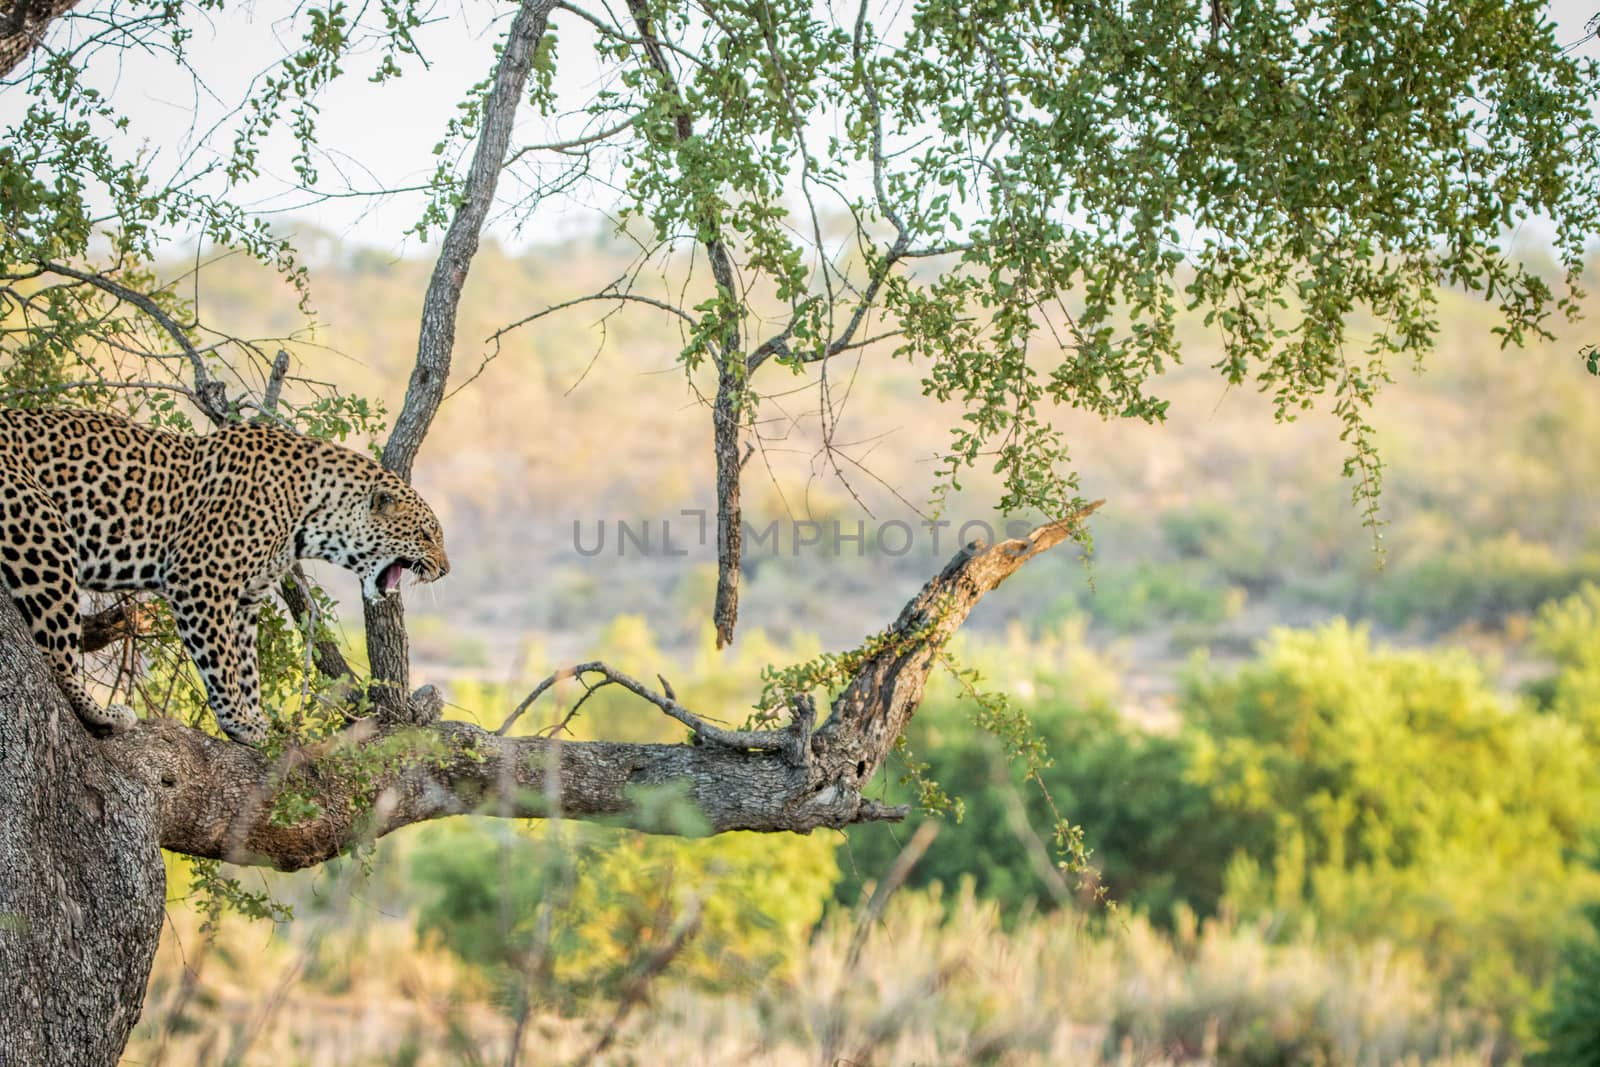 Leopard in a tree in the Kruger National Park. by Simoneemanphotography